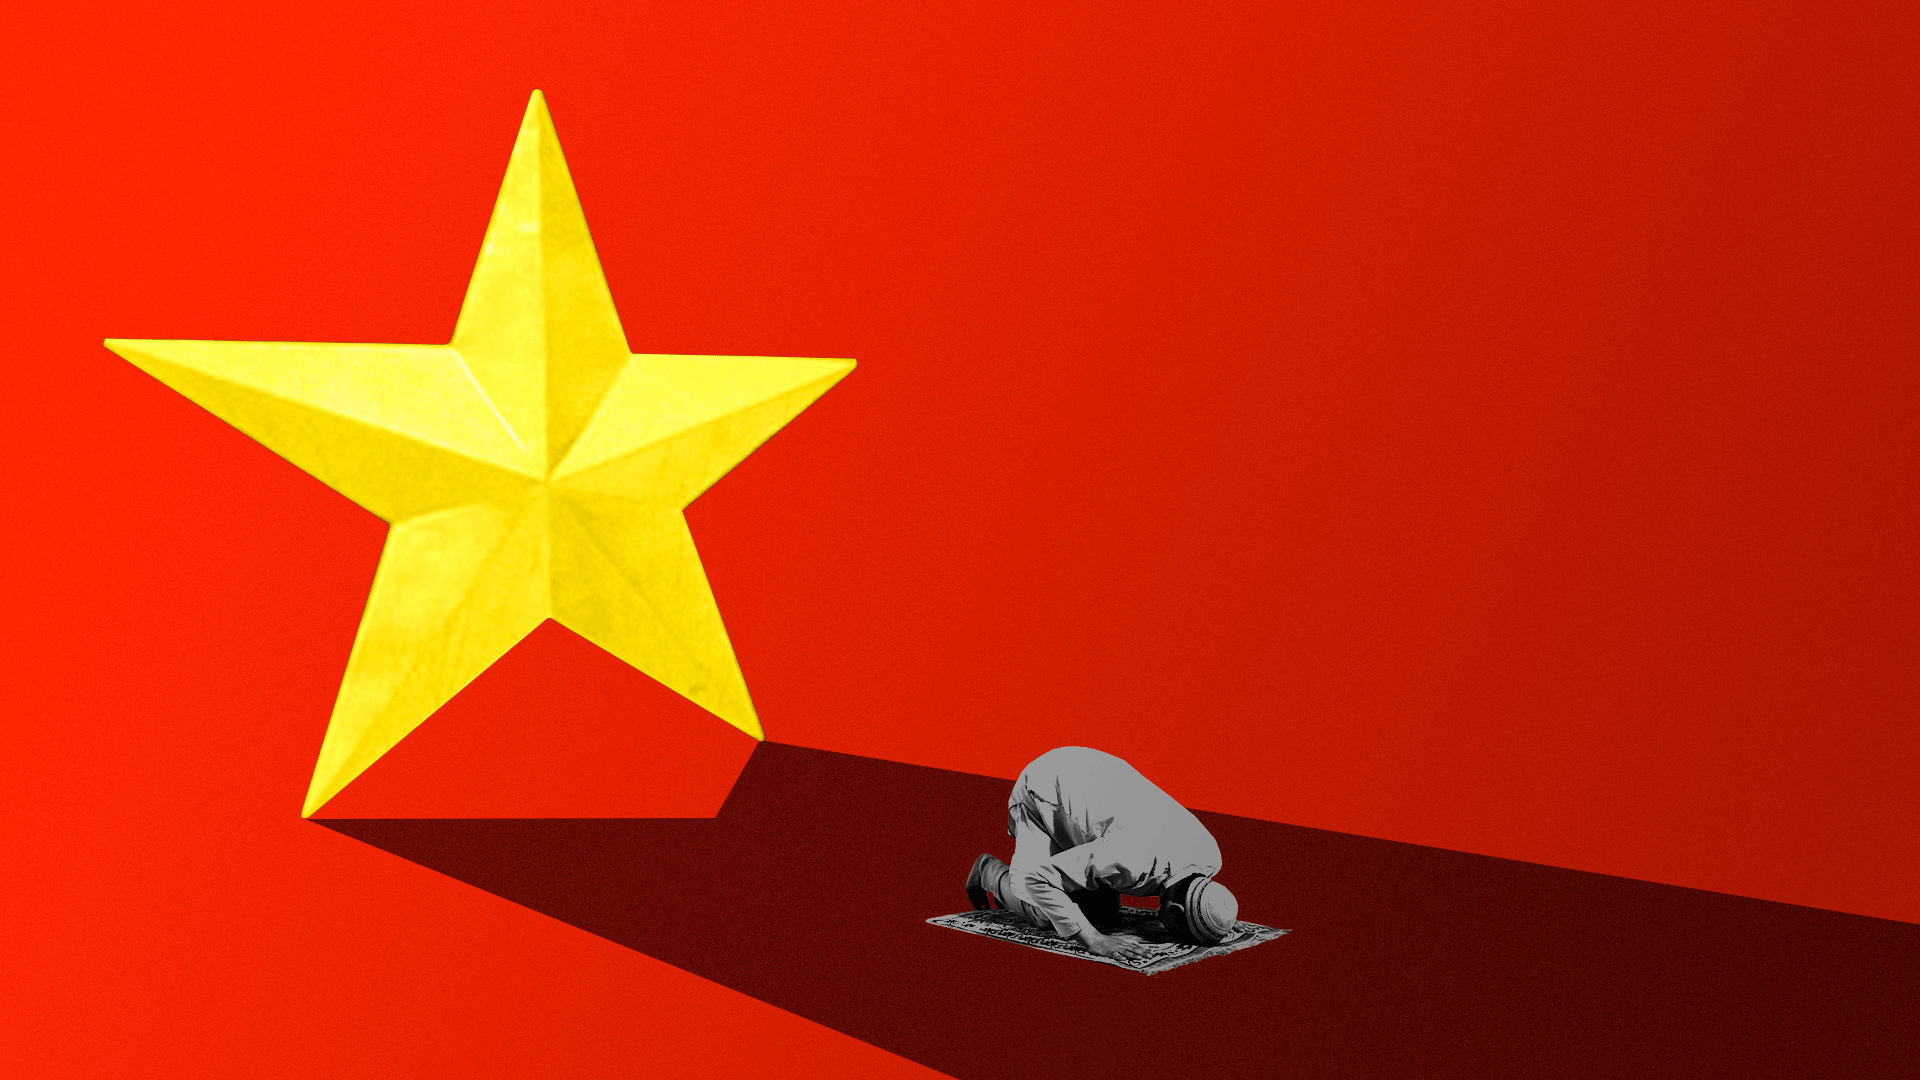 In this illustration, a Muslim man bows to pray while the Chinese flag stands behind him.